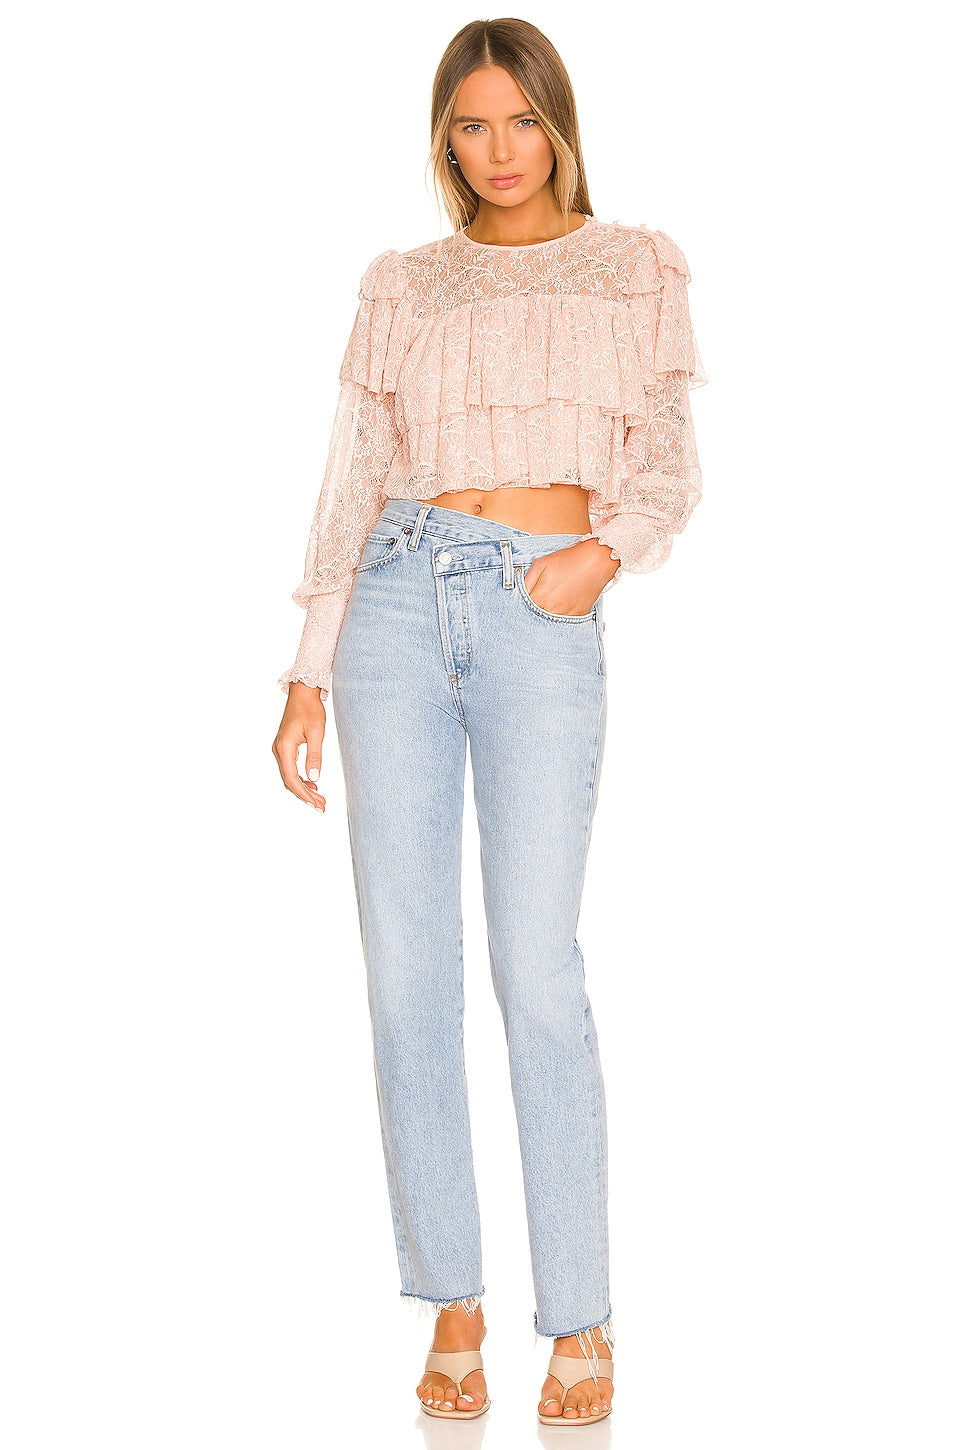 Solange Lace Top in BLUSH